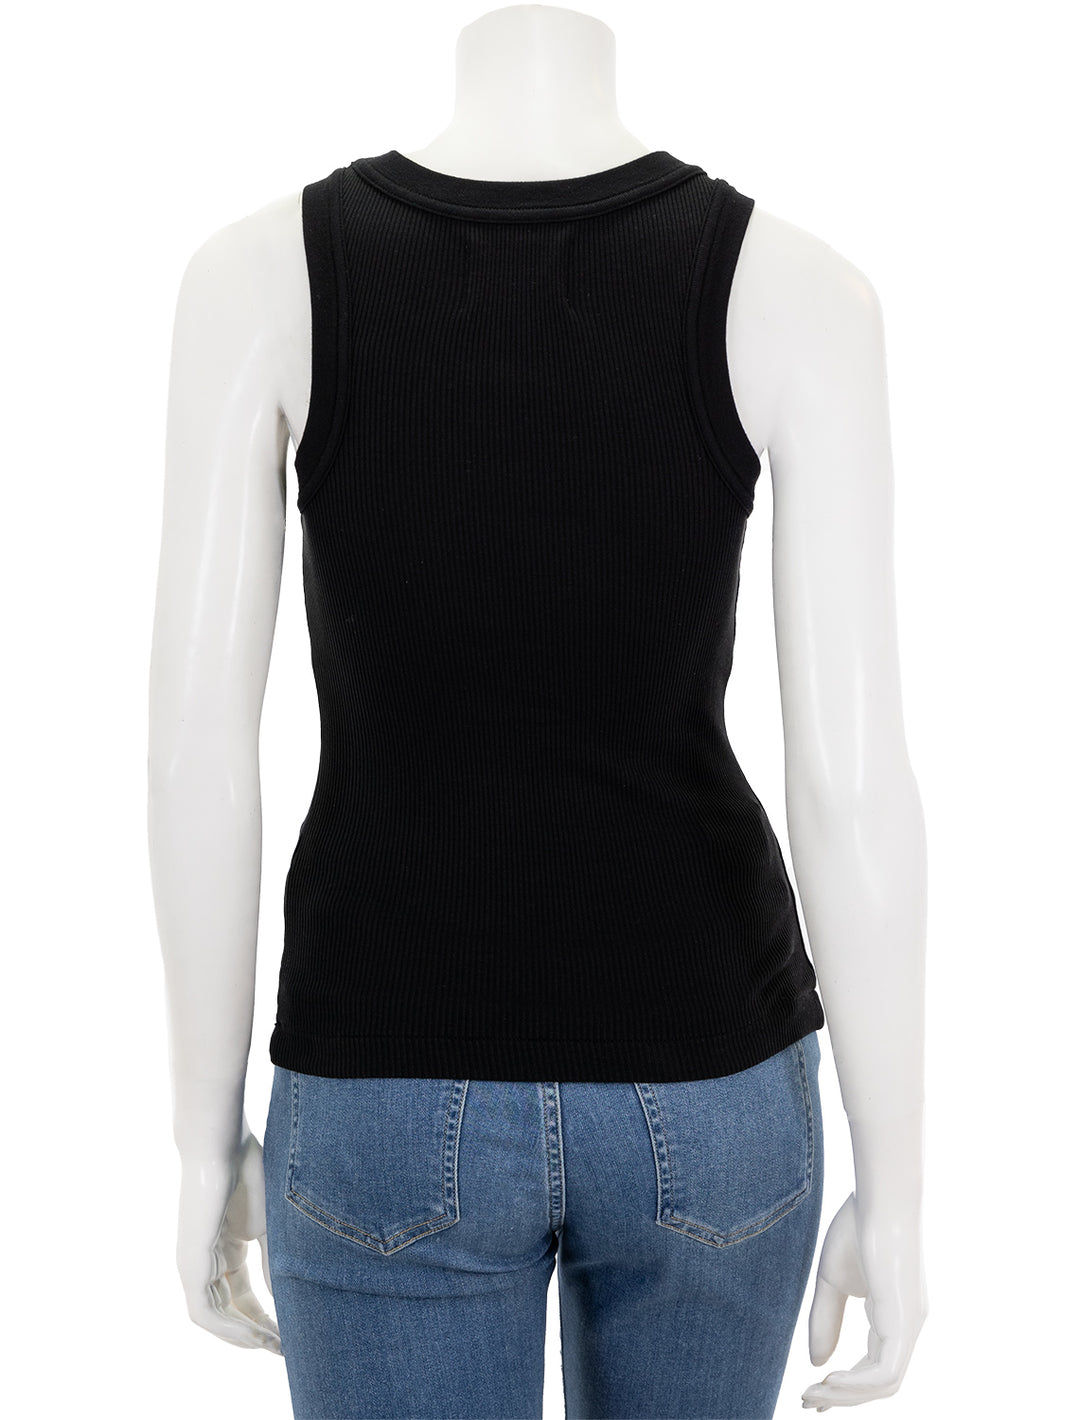 Back view of Citizens of Humanity's isabel rib tank in black.